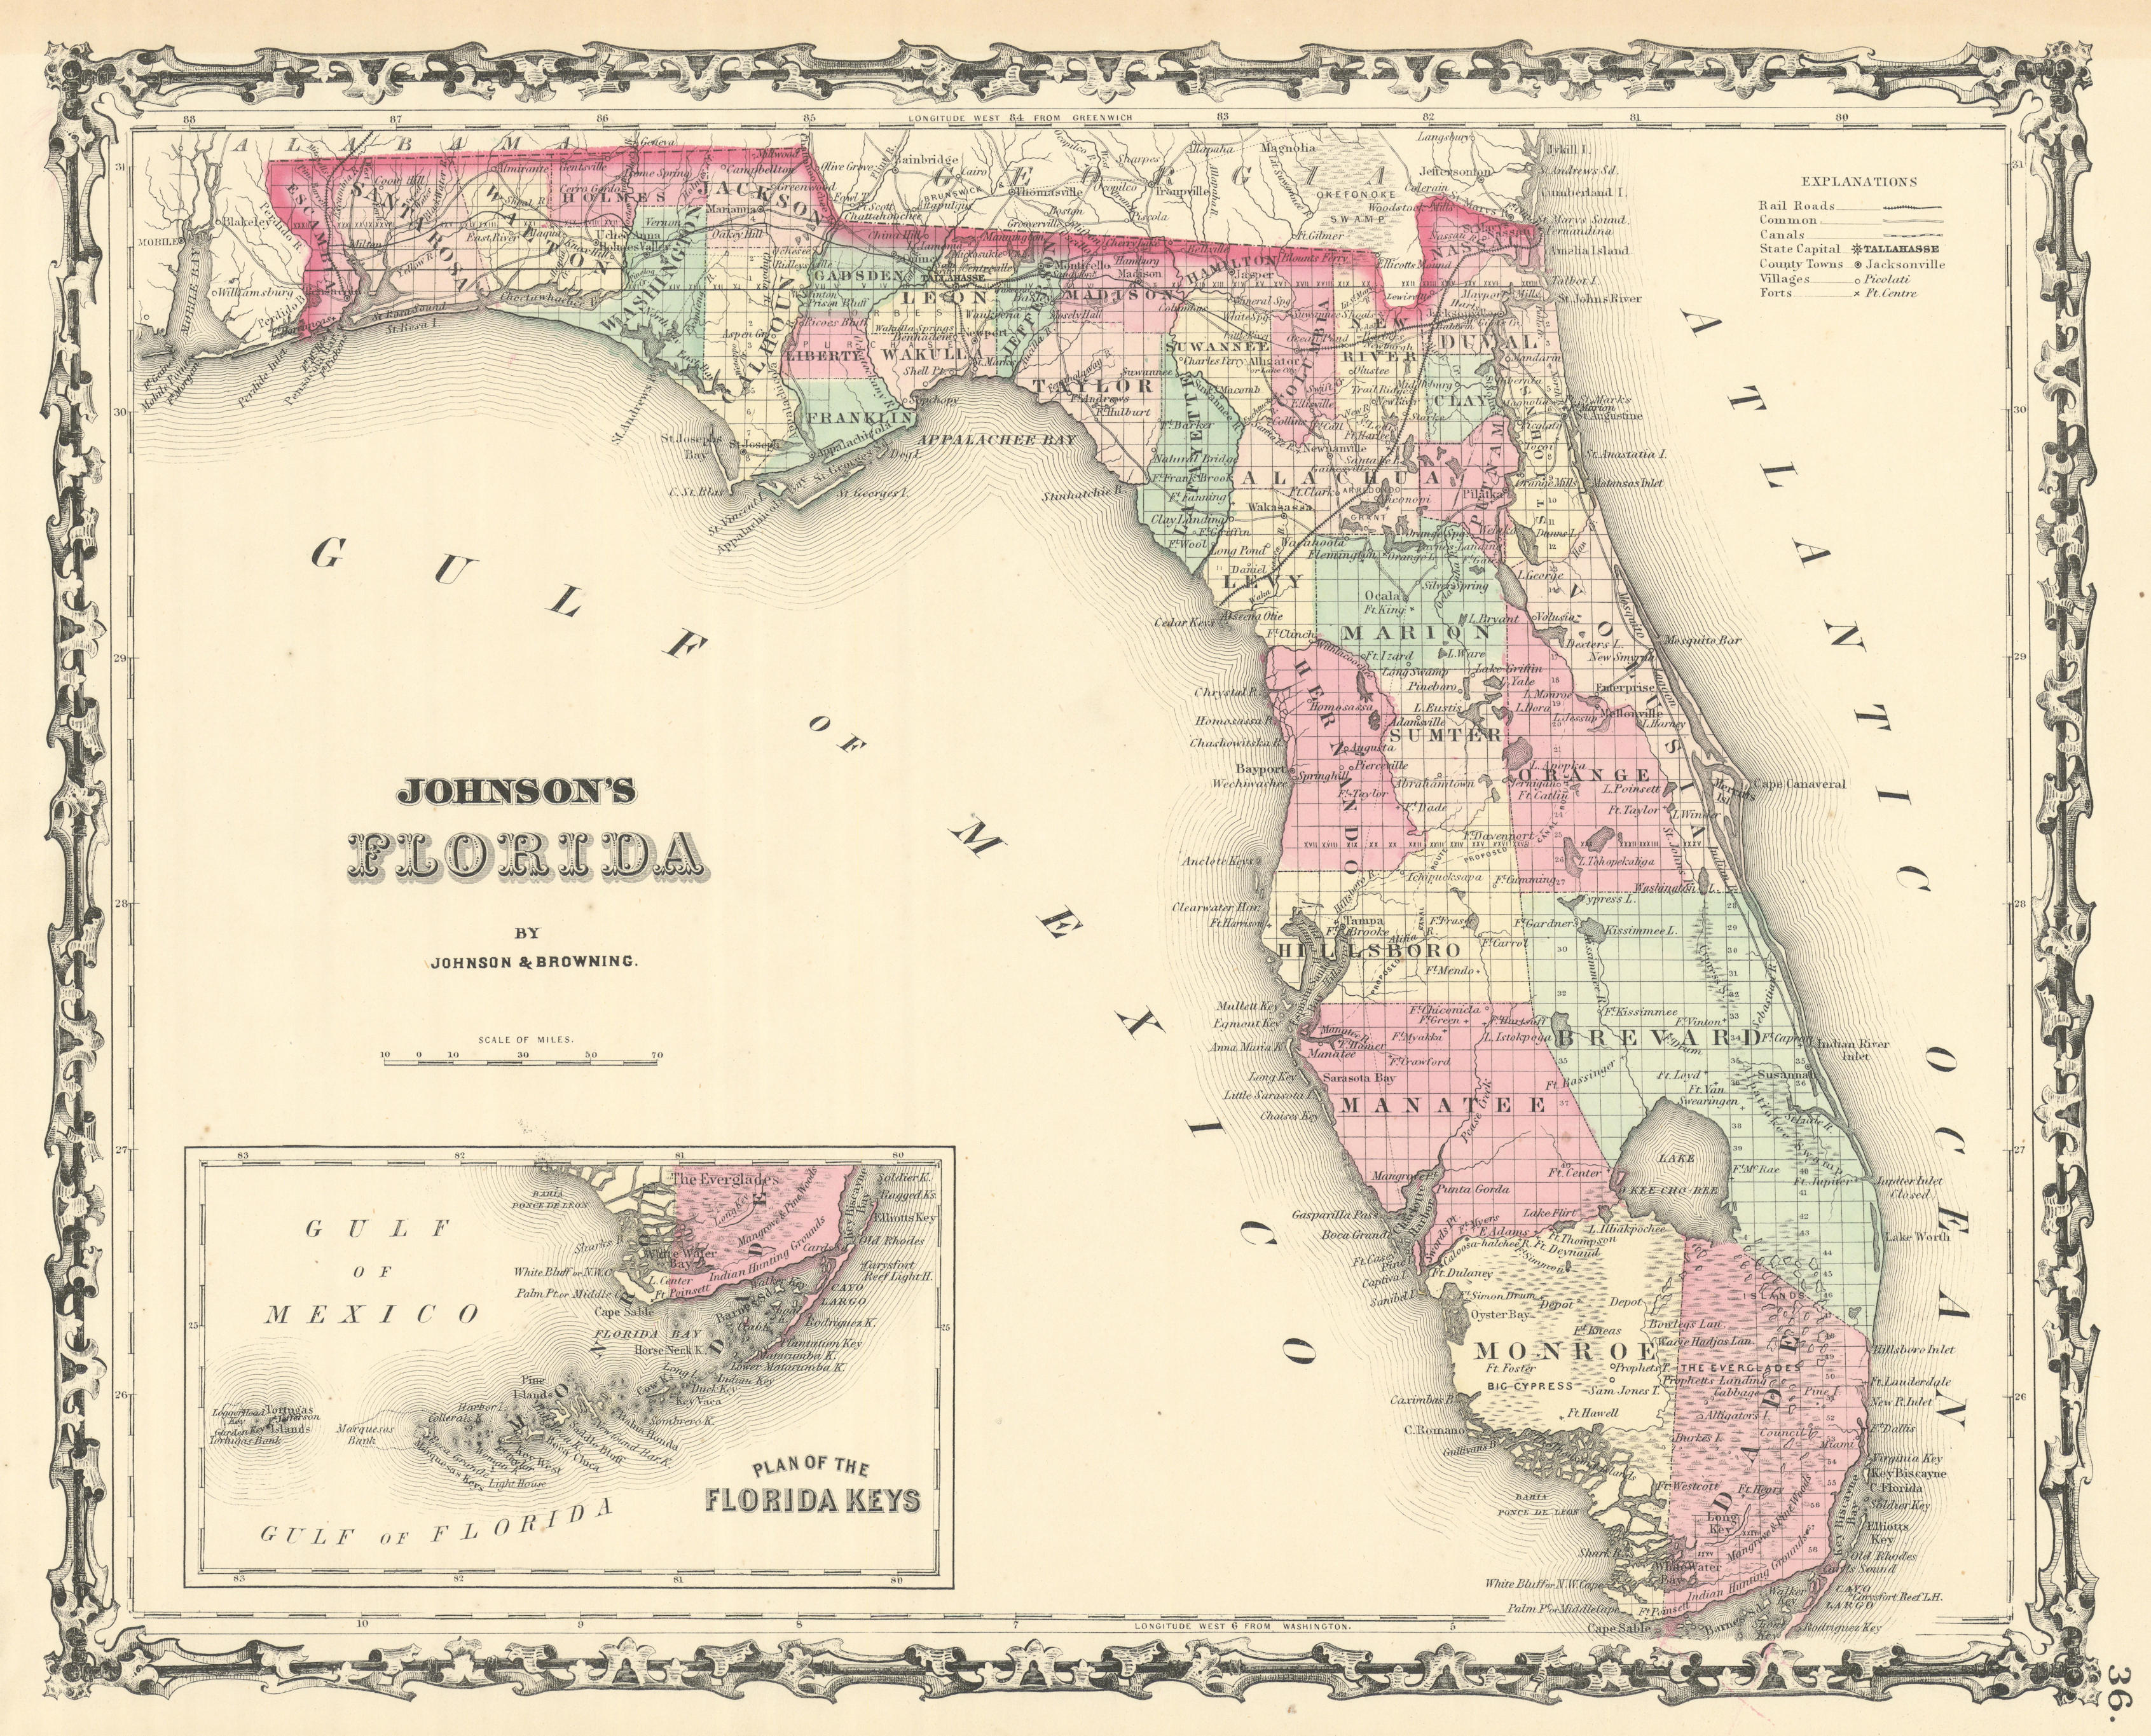 Associate Product Johnson's Florida. Florida Keys. US state map showing counties 1861 old